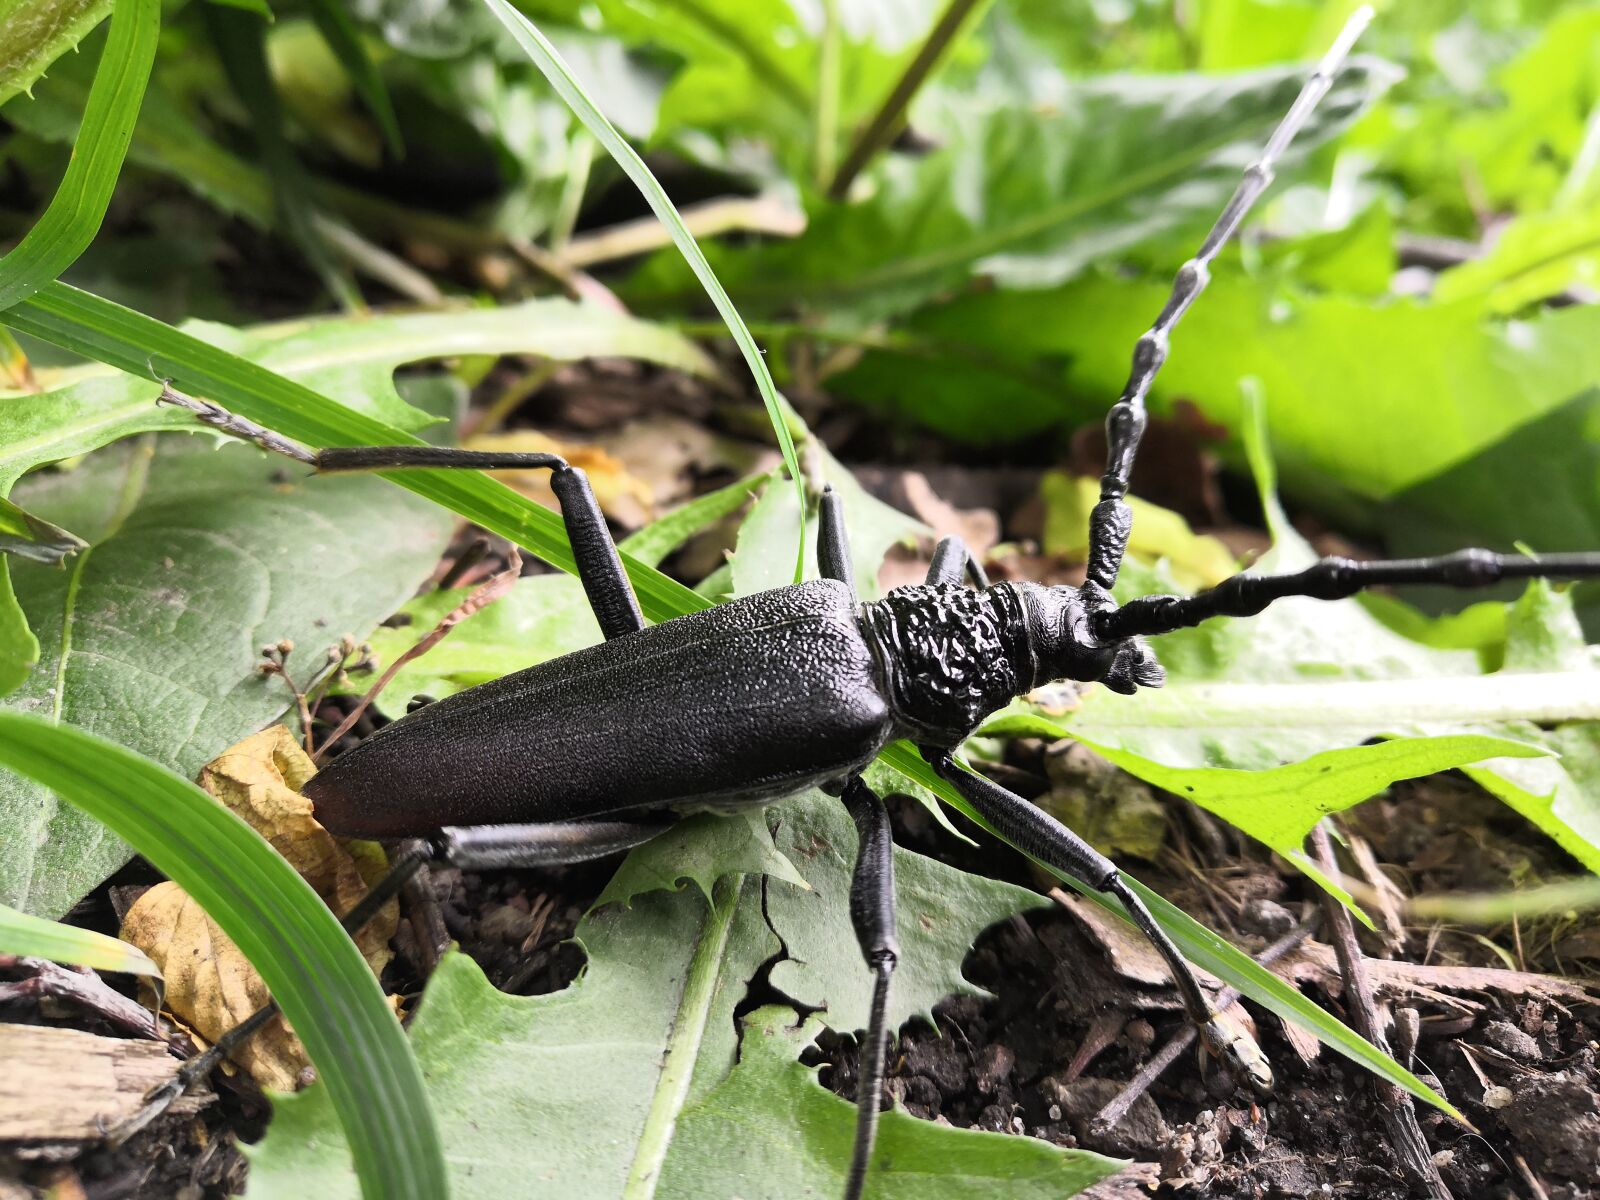 HUAWEI Honor 10 sample photo. Worm, beetle, insect photography